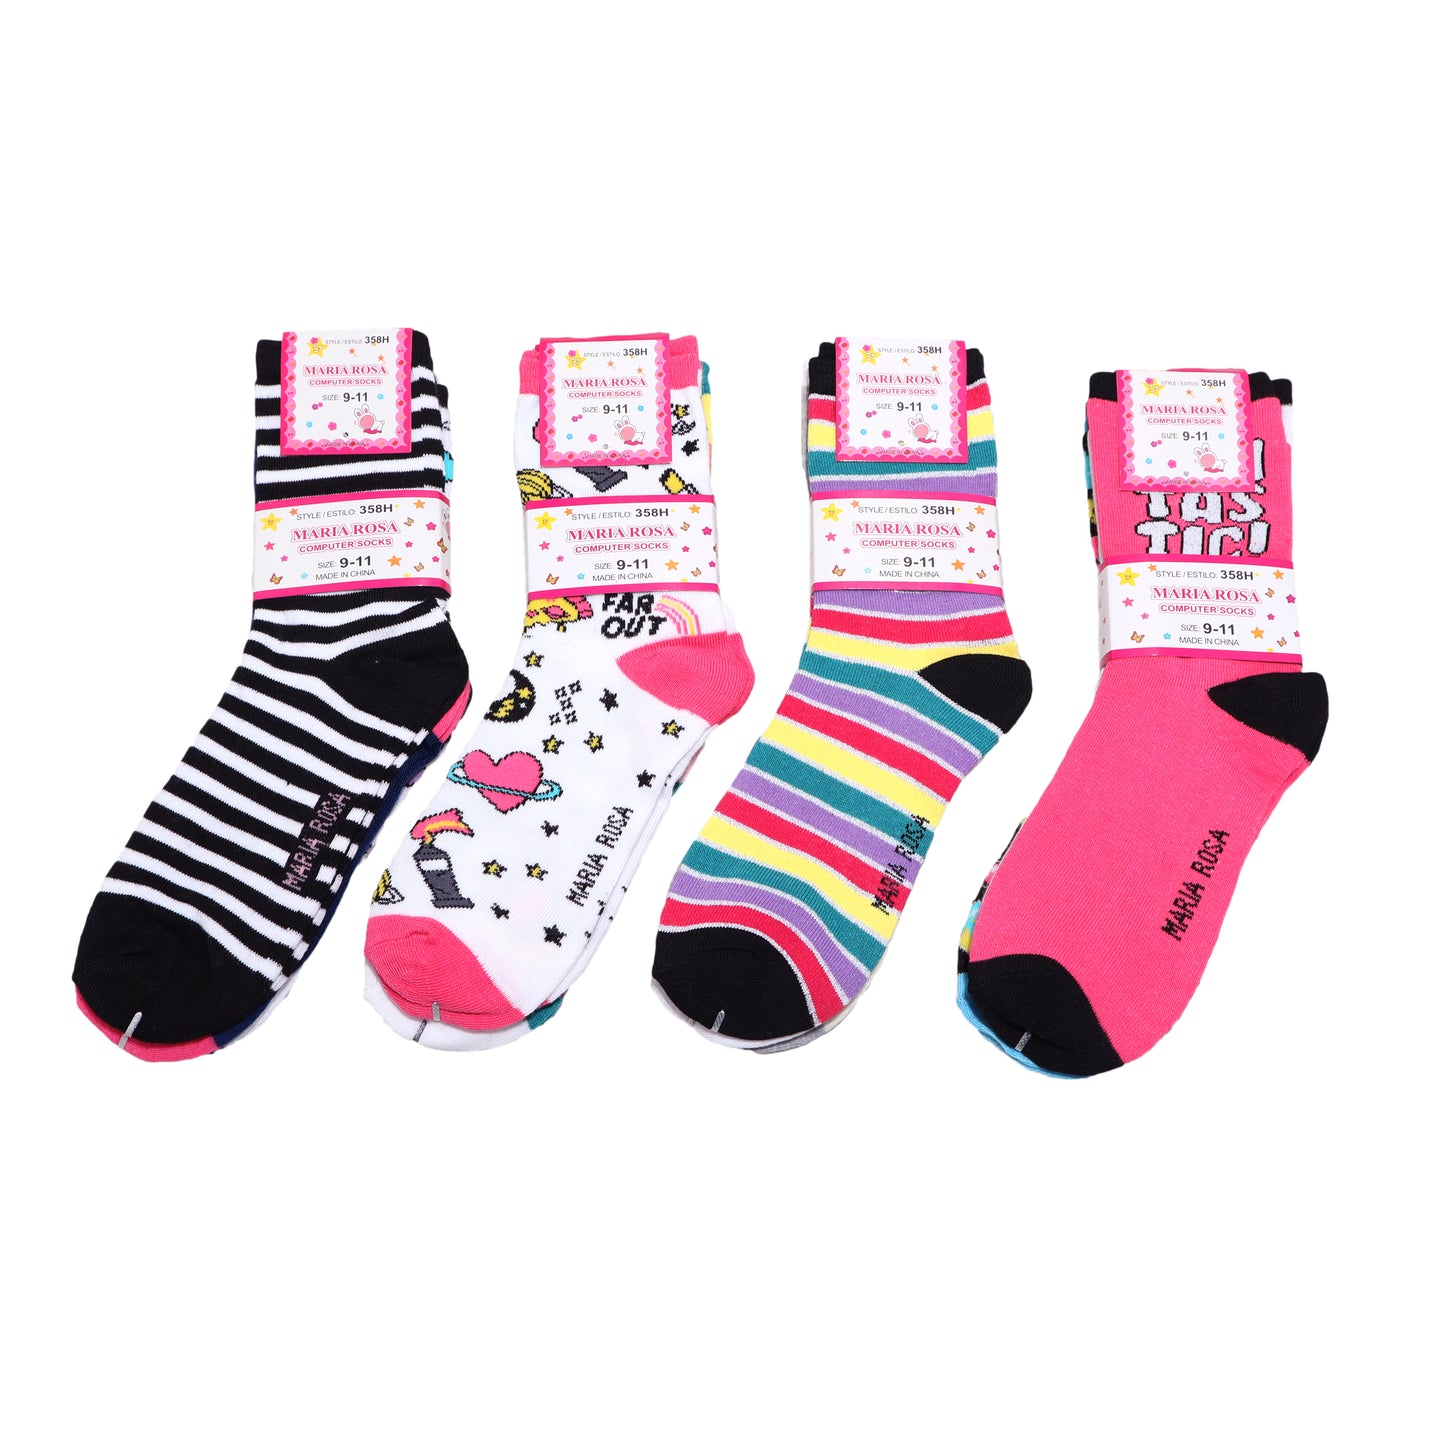 Kid's Novelty Crew Socks with Assorted Knit Designs (12-Pairs)